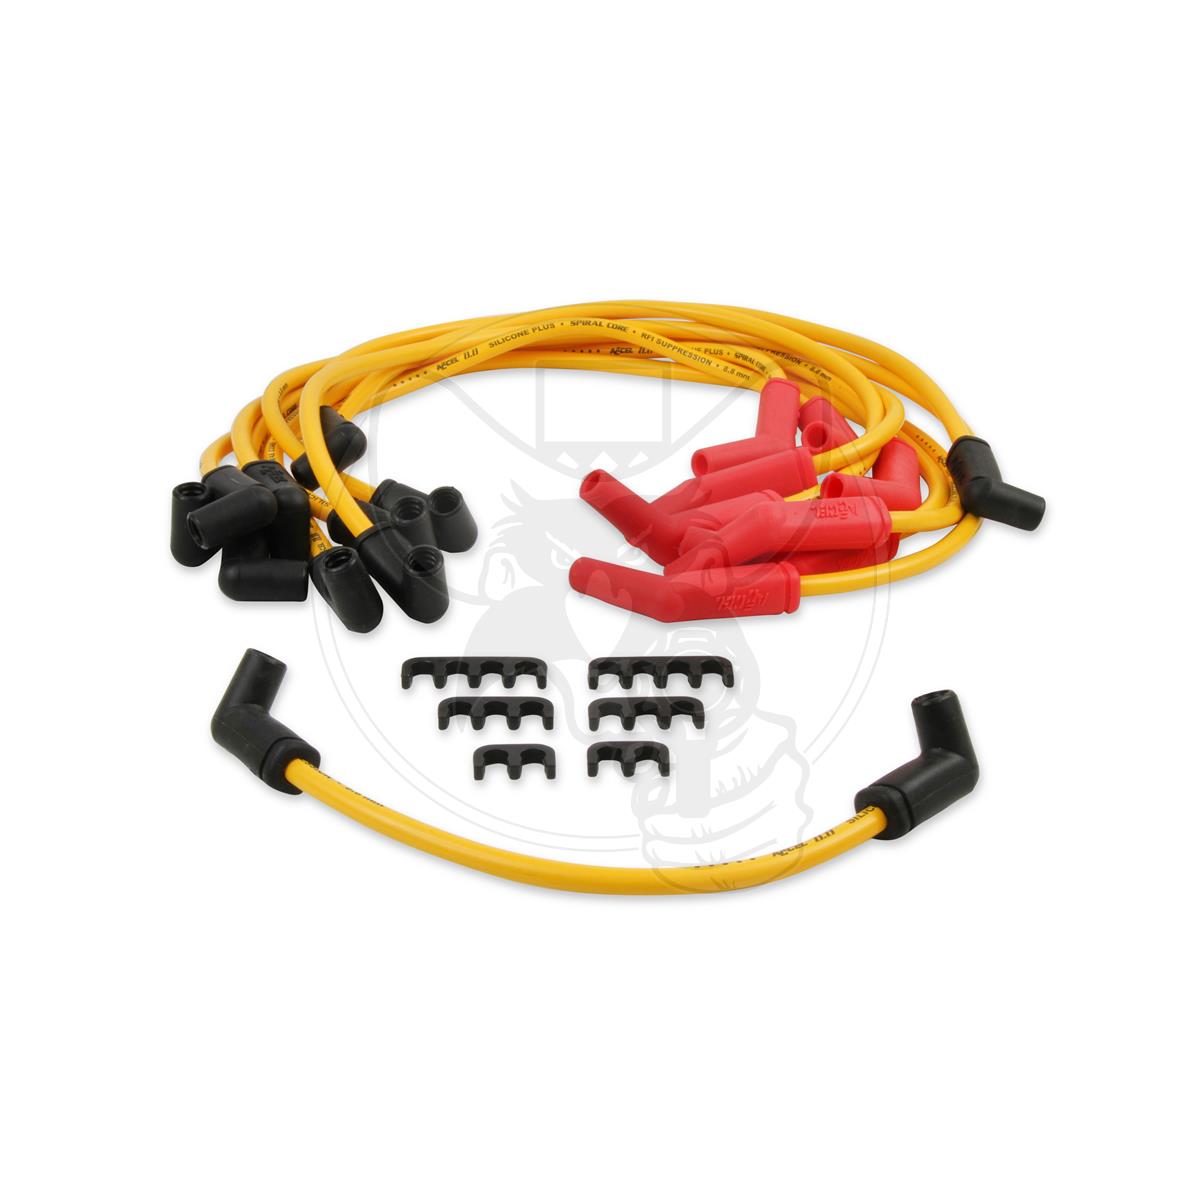 ACCEL IGNITION LEAD SET 8.8MM SPIRAL CORE CUSTOM FIT YELLOW